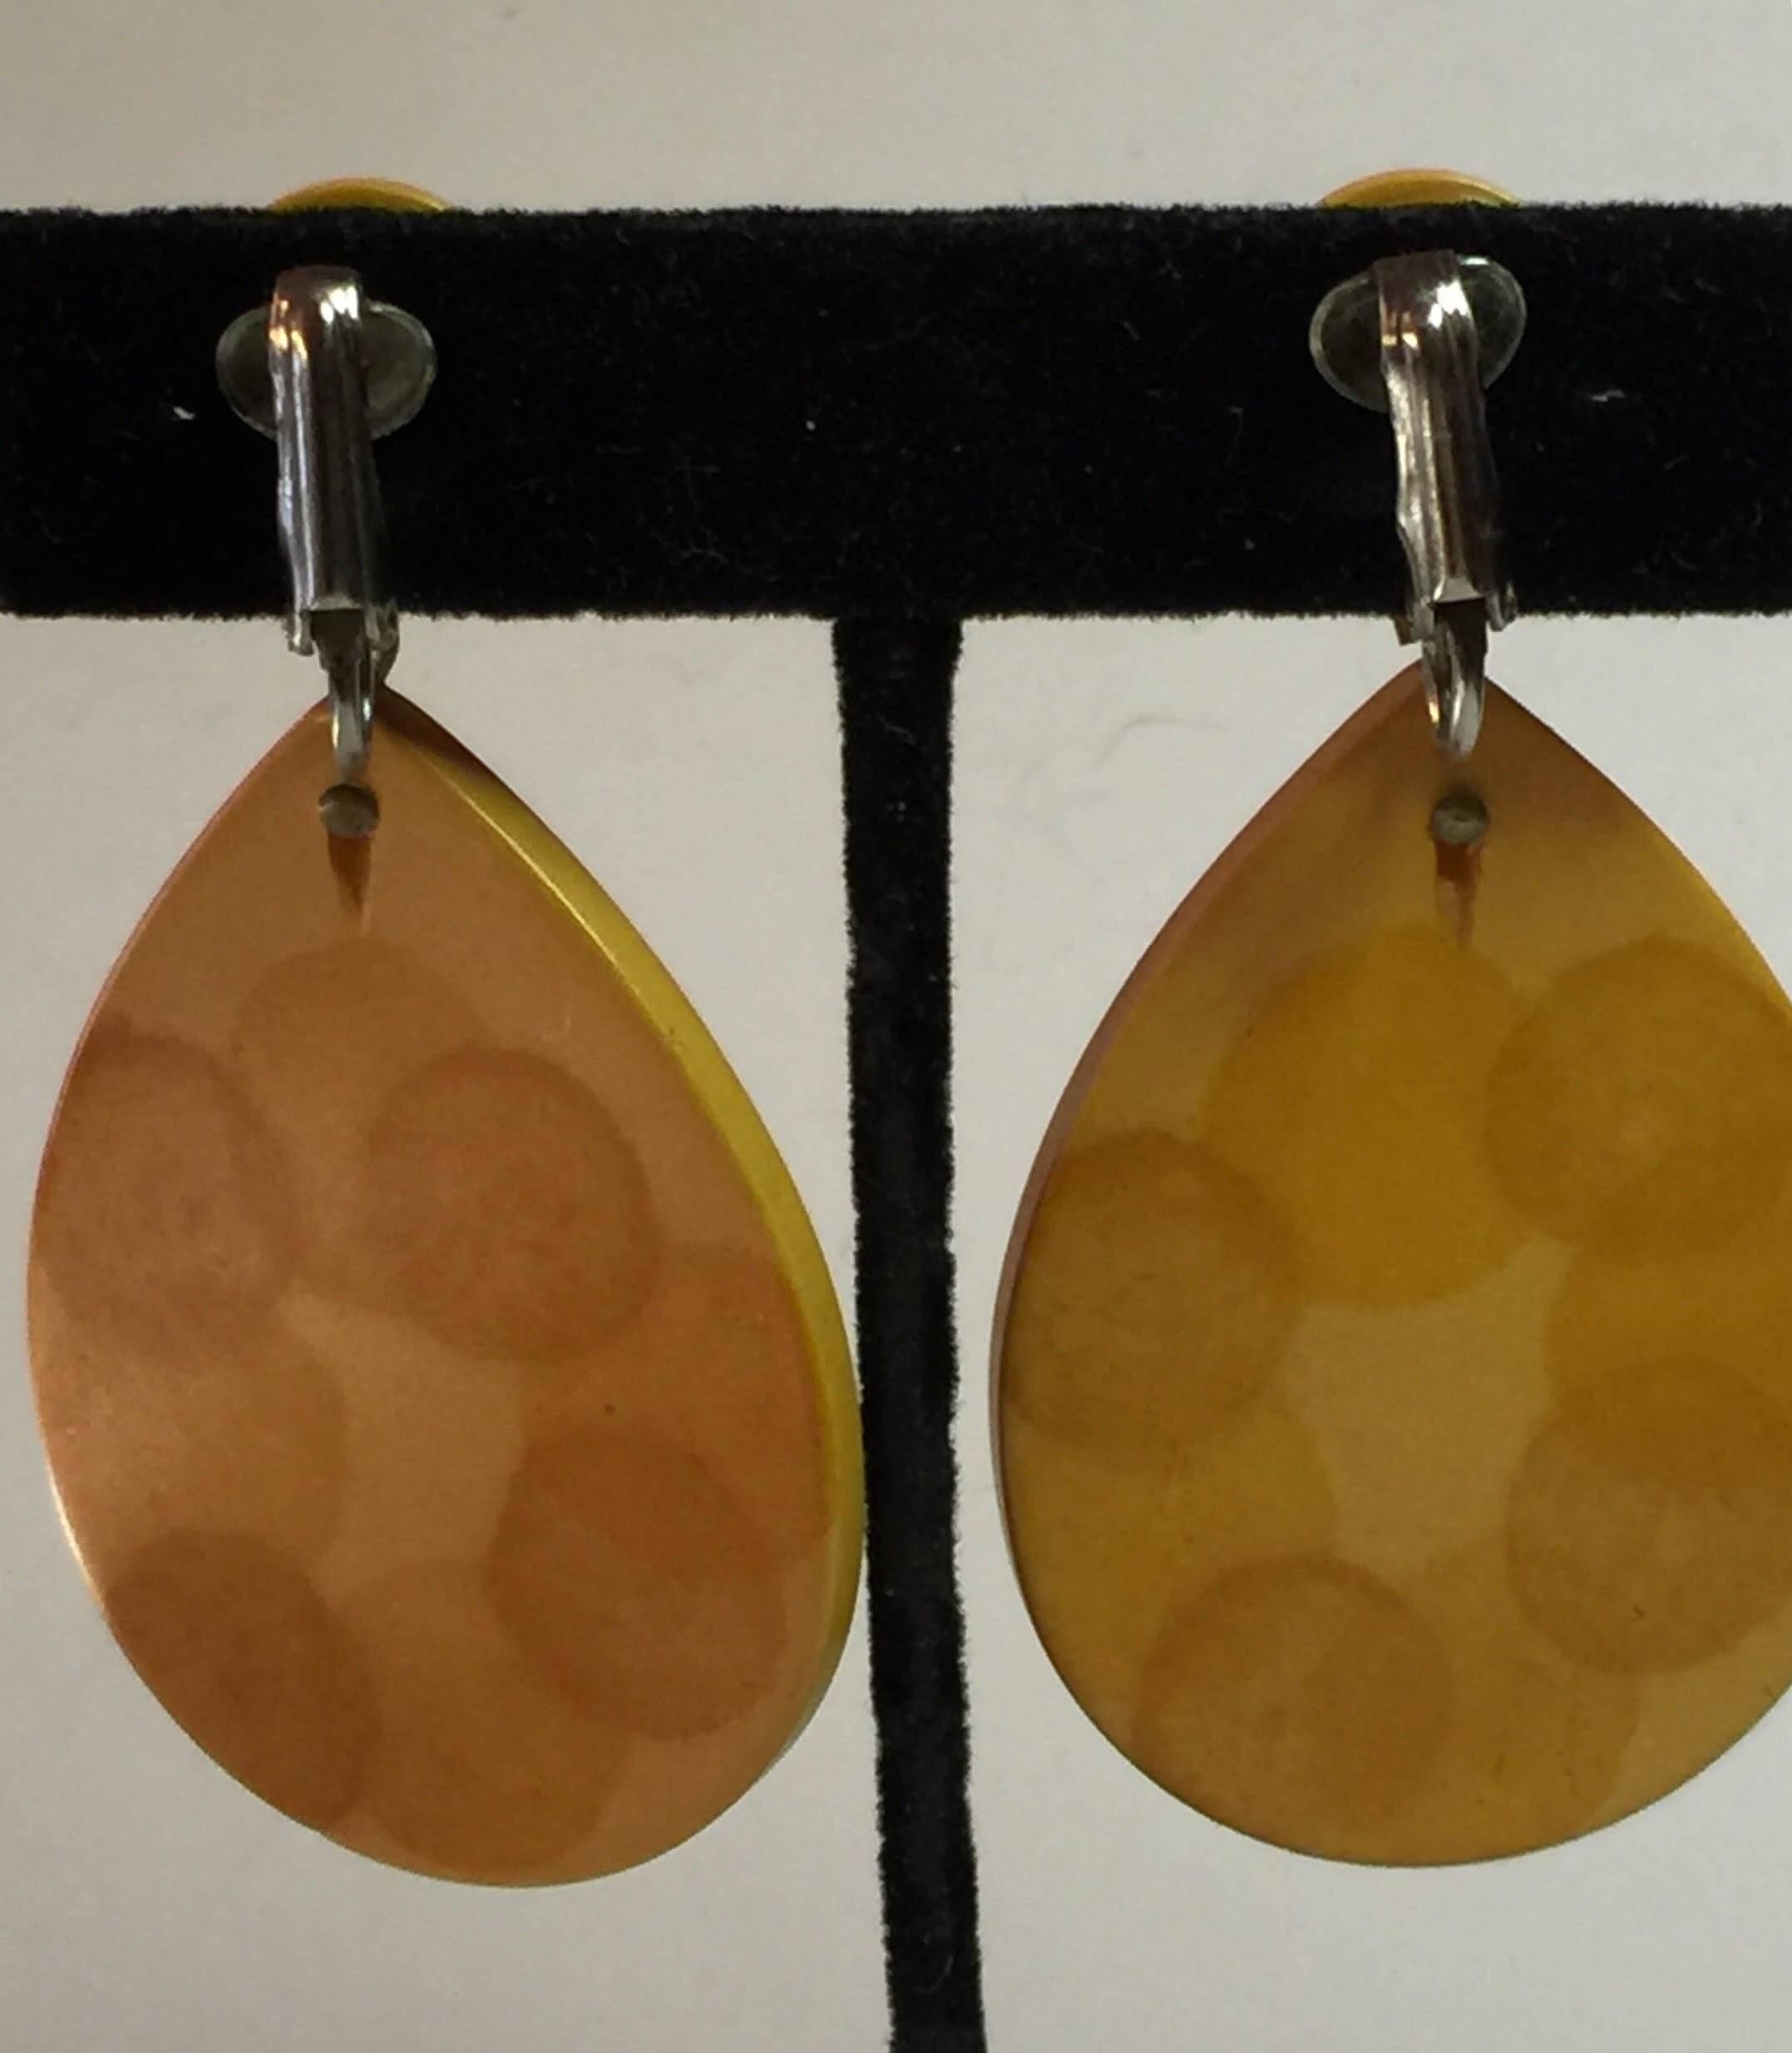 These 1930s Bakelite Teardrop Large Drop Clip On Earrings in an Airbrush Moderne Design are a total of almost 3" long. The teardrop lower section measures 2" long by 1.4" wide.The upper disc with clip on mechanism attached is